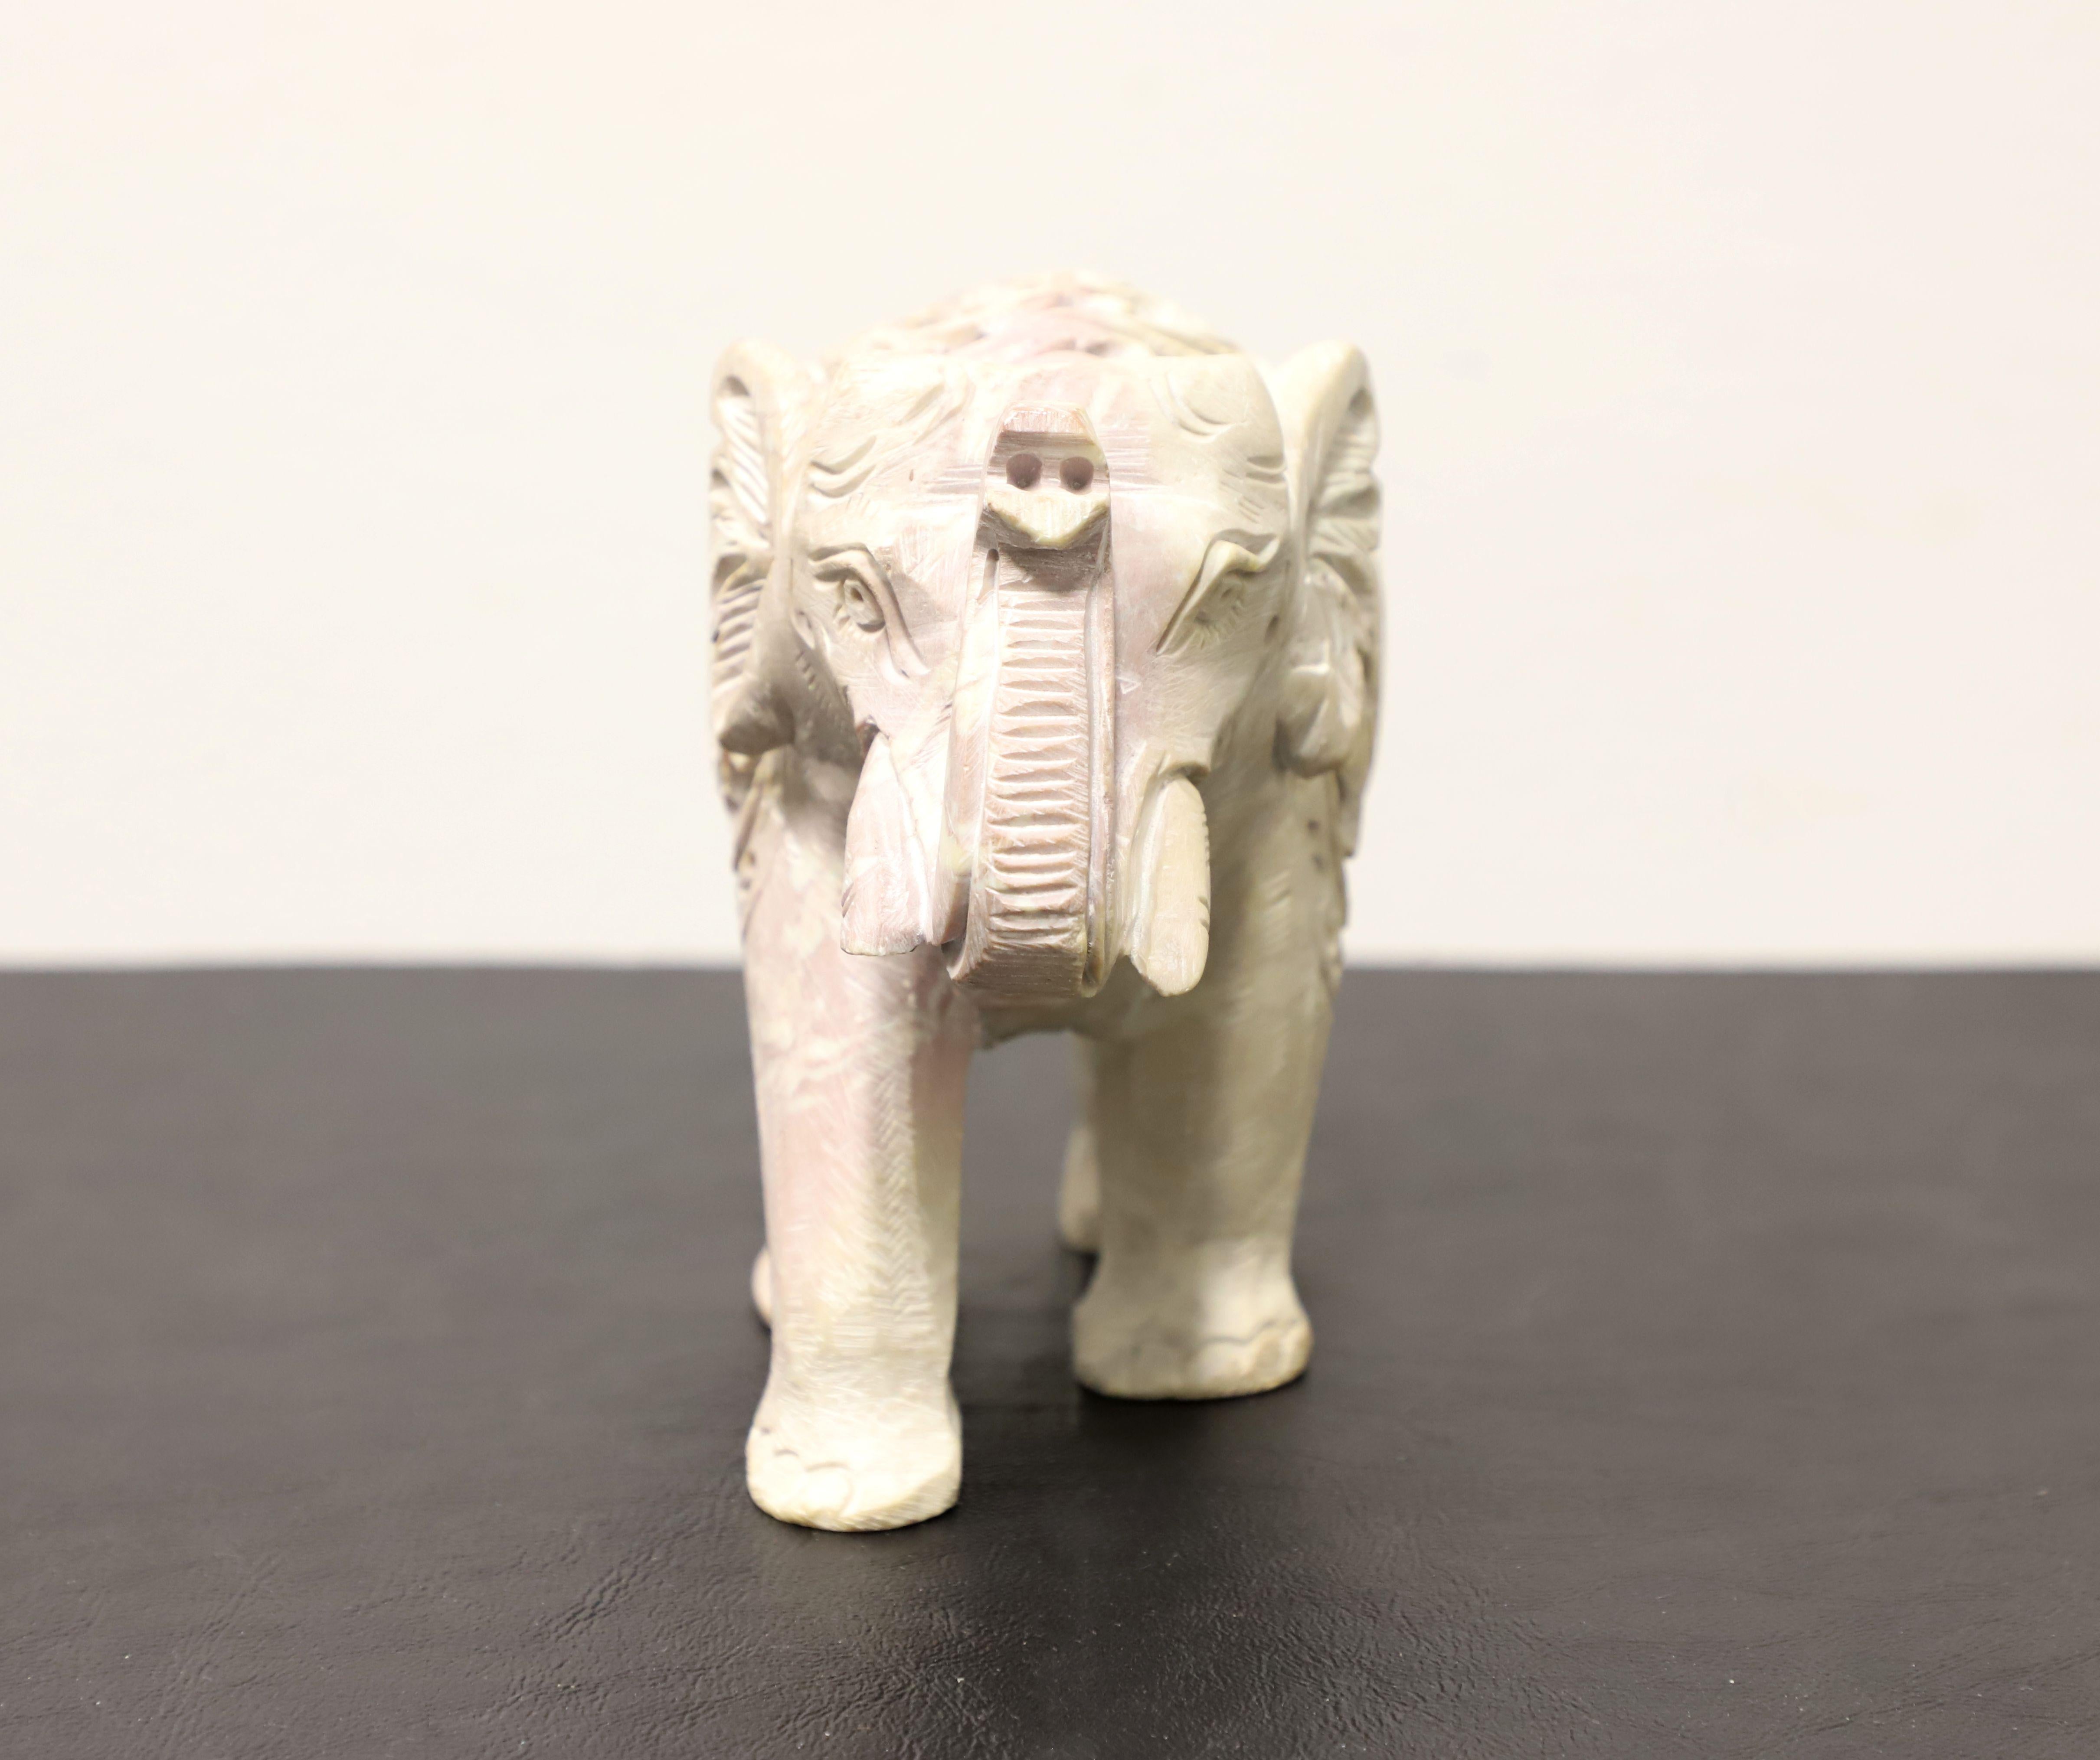 A table top sculpture in stone depicting an Indian elephant with a baby elephant inside. Unsigned, artist unknown. Intricately open carved cream color stone with exquisite detail. Made in India, in the mid 20th Century.

Measures:  3w 6.5d 5.25h,